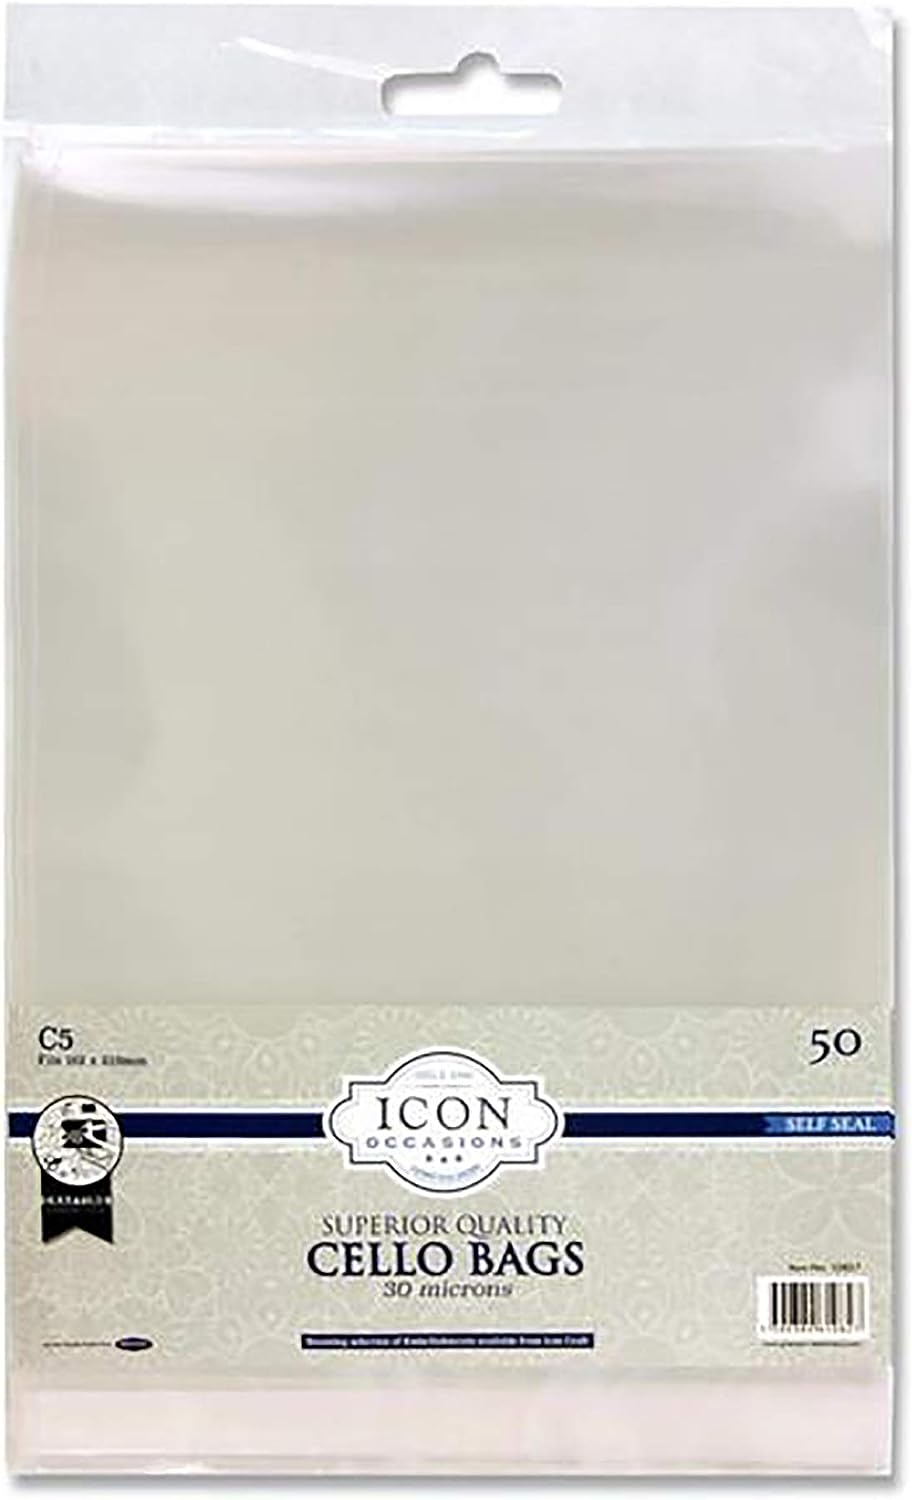 Premier Stationery Icon C5 Self Seal Cello Bags Pack of 50 RRP 4.50 CLEARANCE XL 3.99